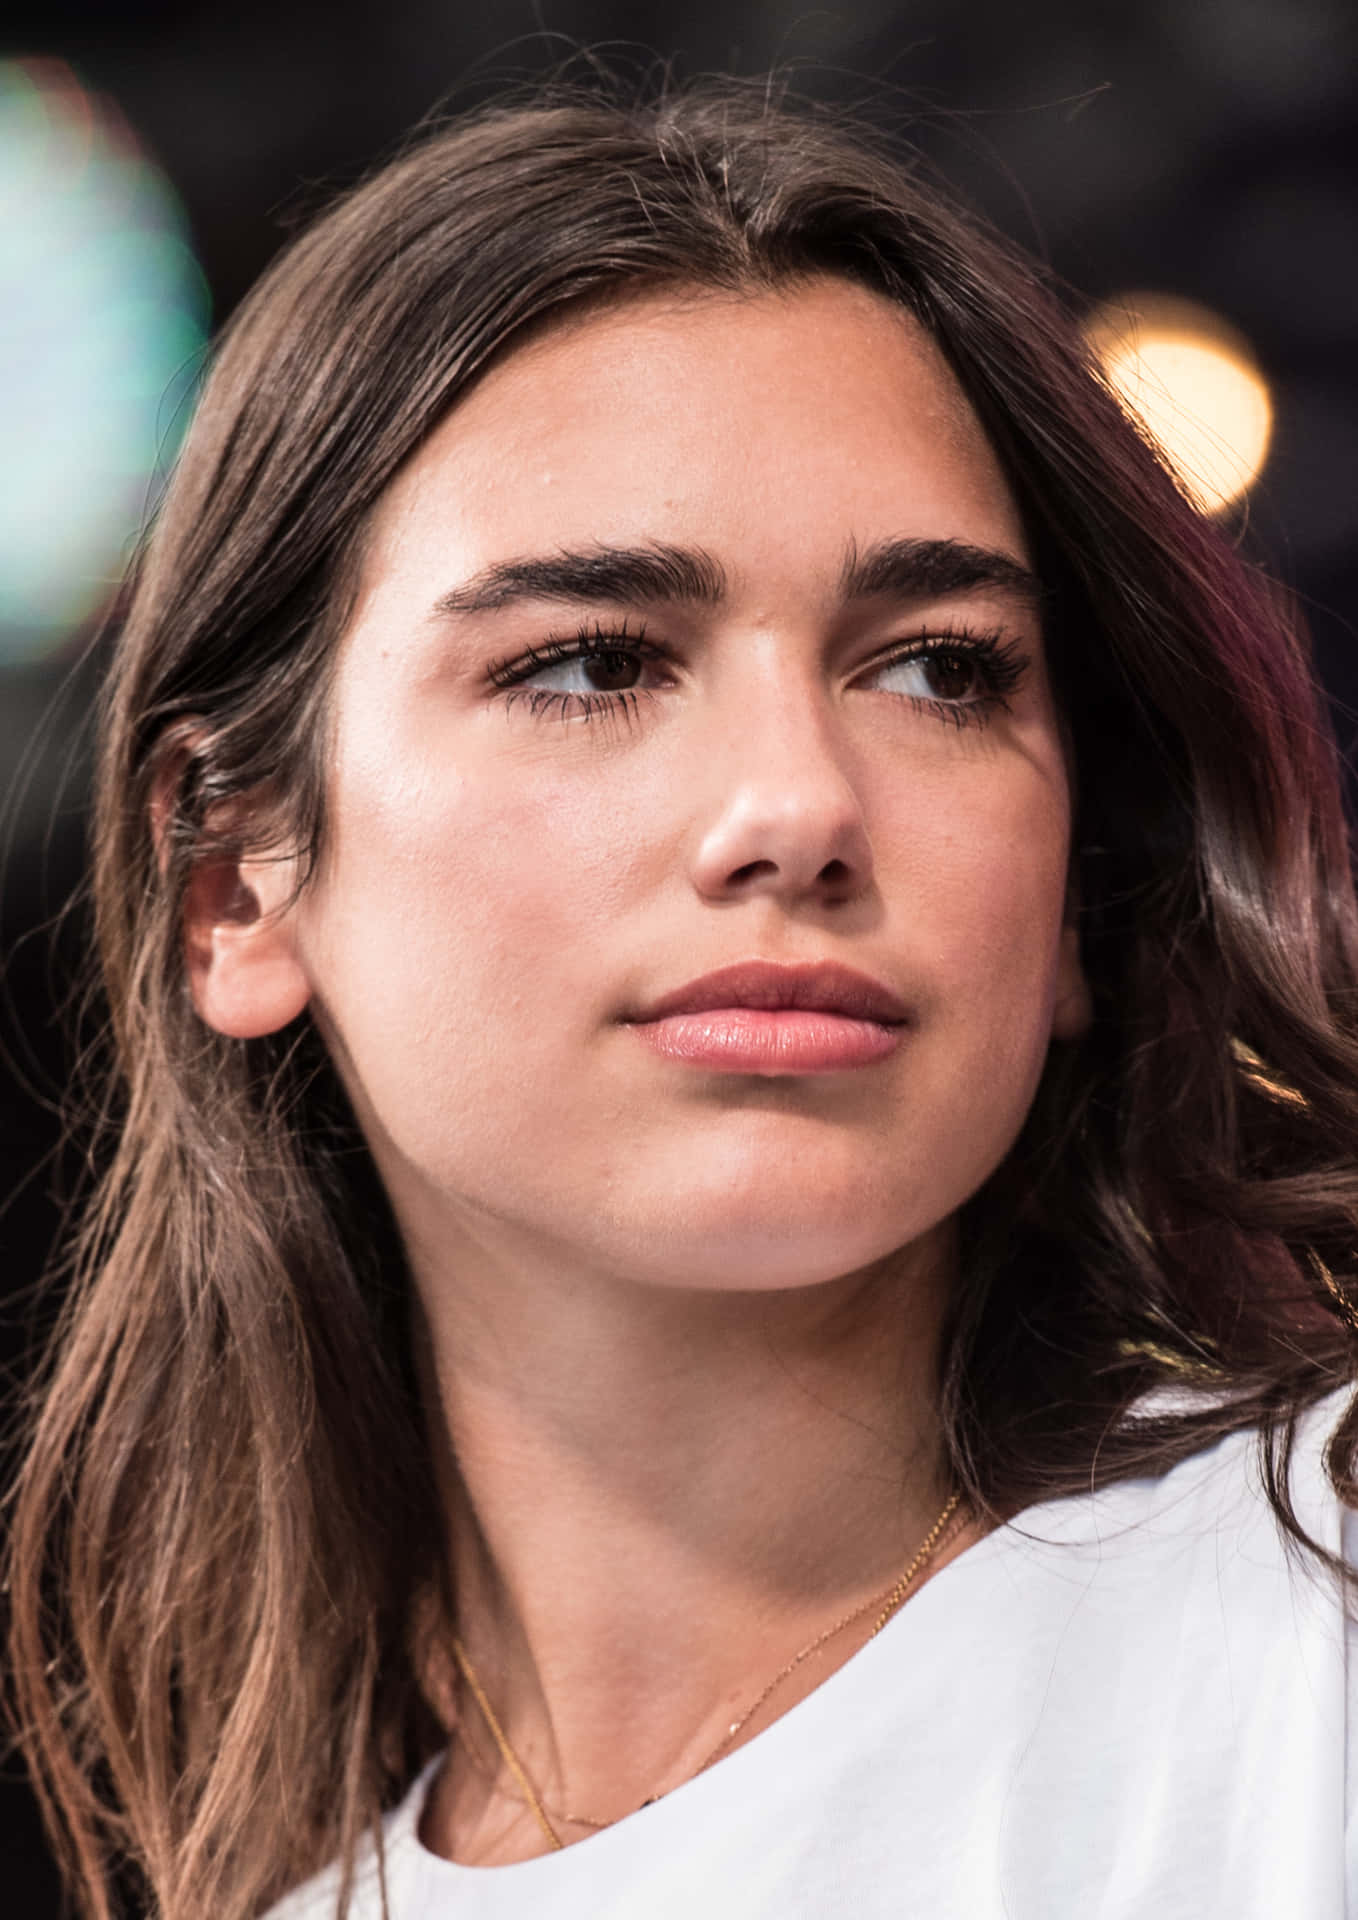 Dua Lipa looking sultry in a strapless dress